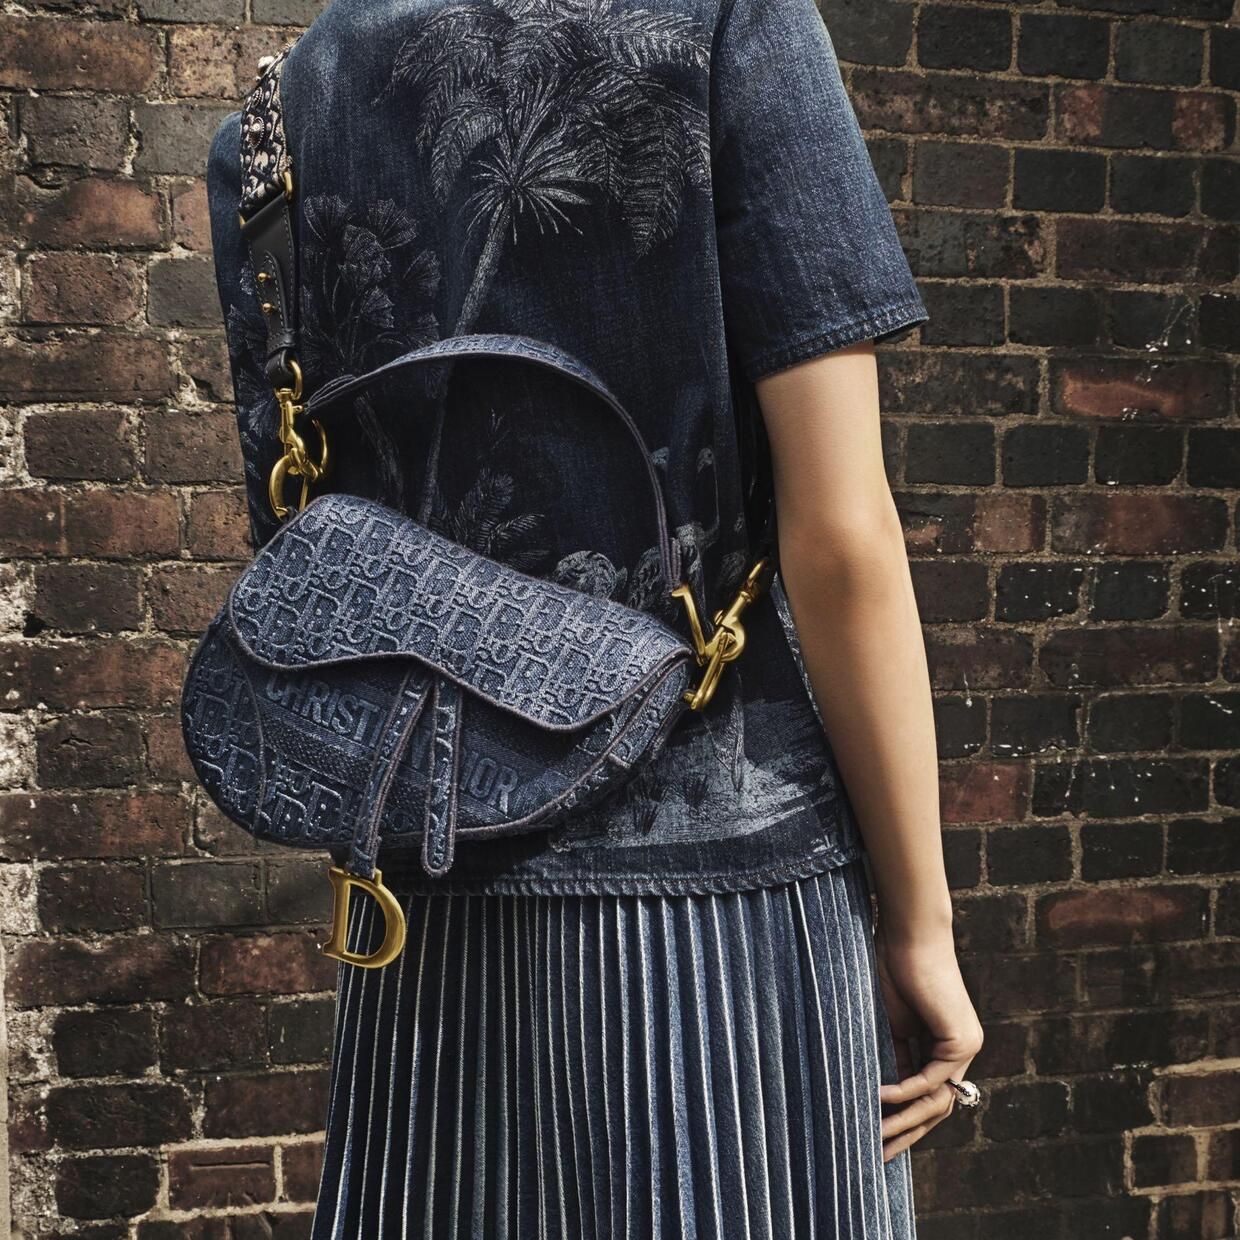 Dior Saddle Bag Now Available in Embroidered Denim